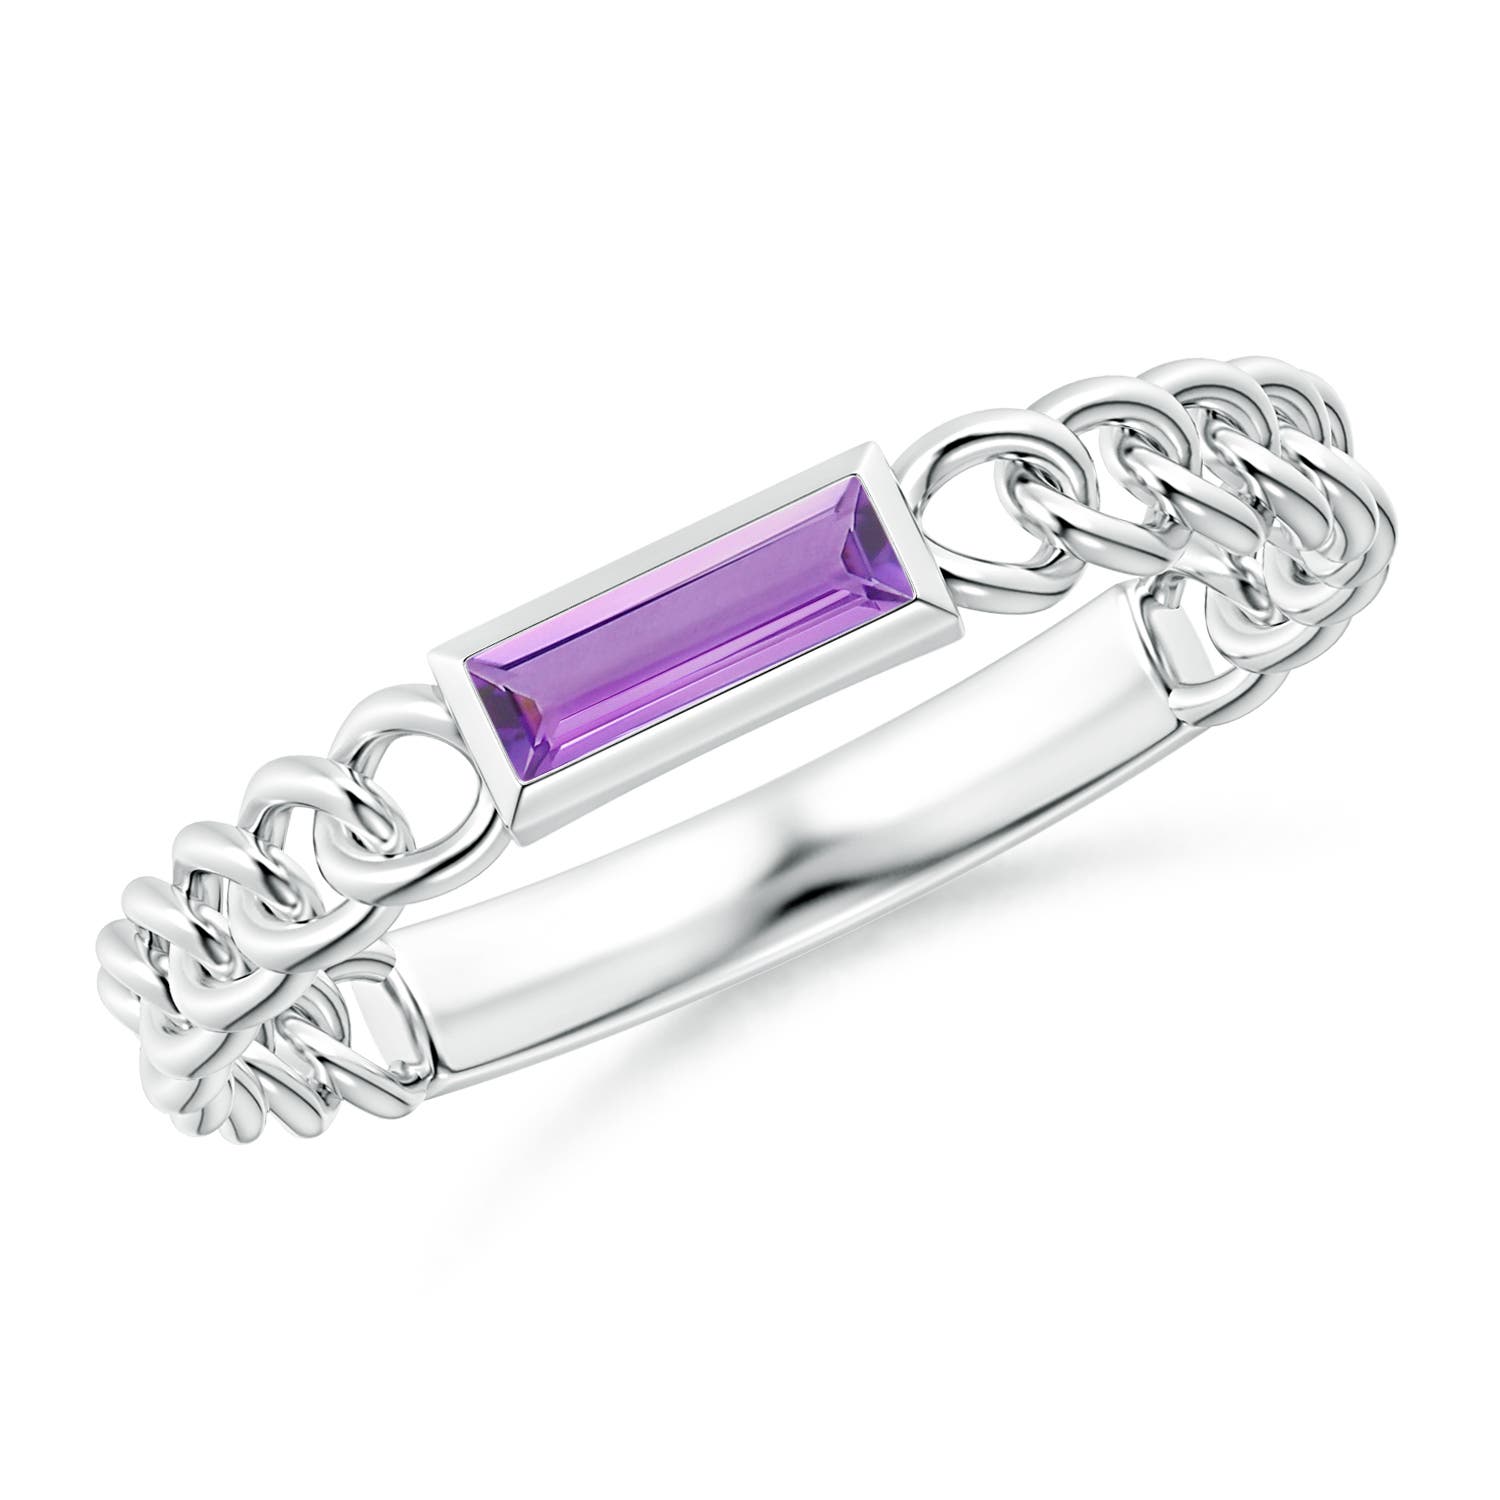 A - Amethyst / 0.18 CT / 14 KT White Gold